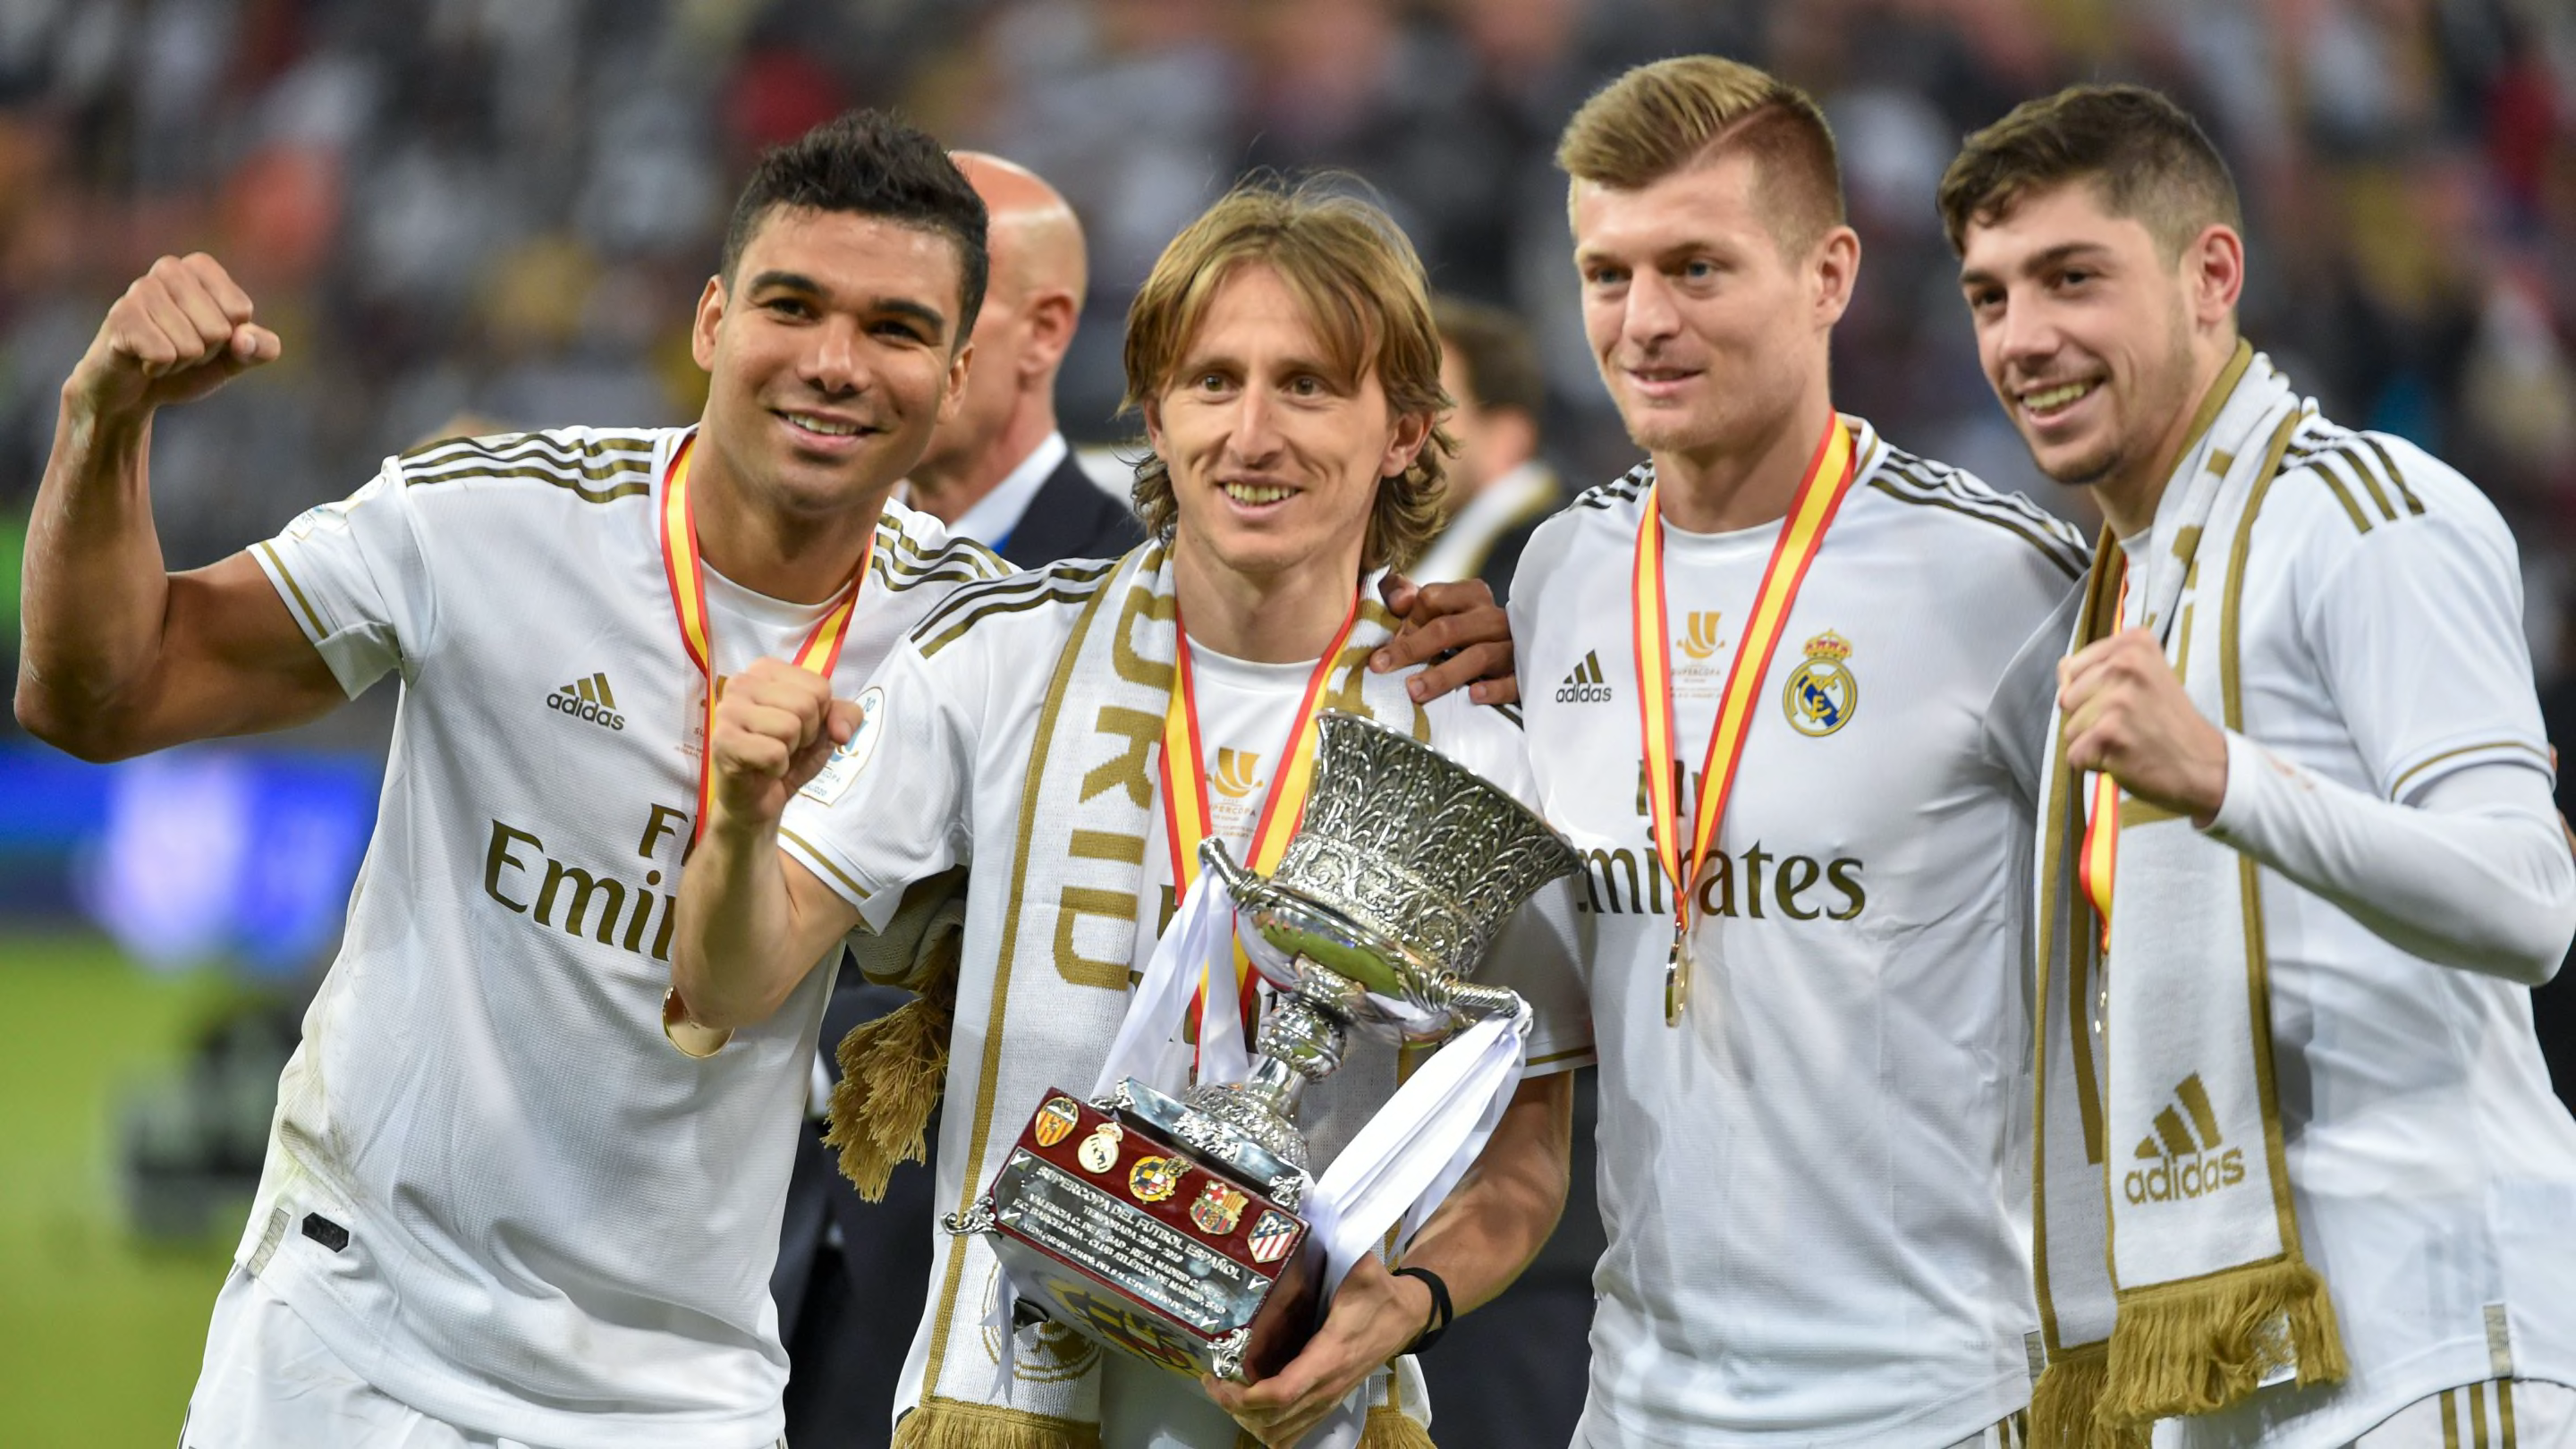 Real Madrid in the Supercopa de Espana: Full history, total wins and top goalscorers